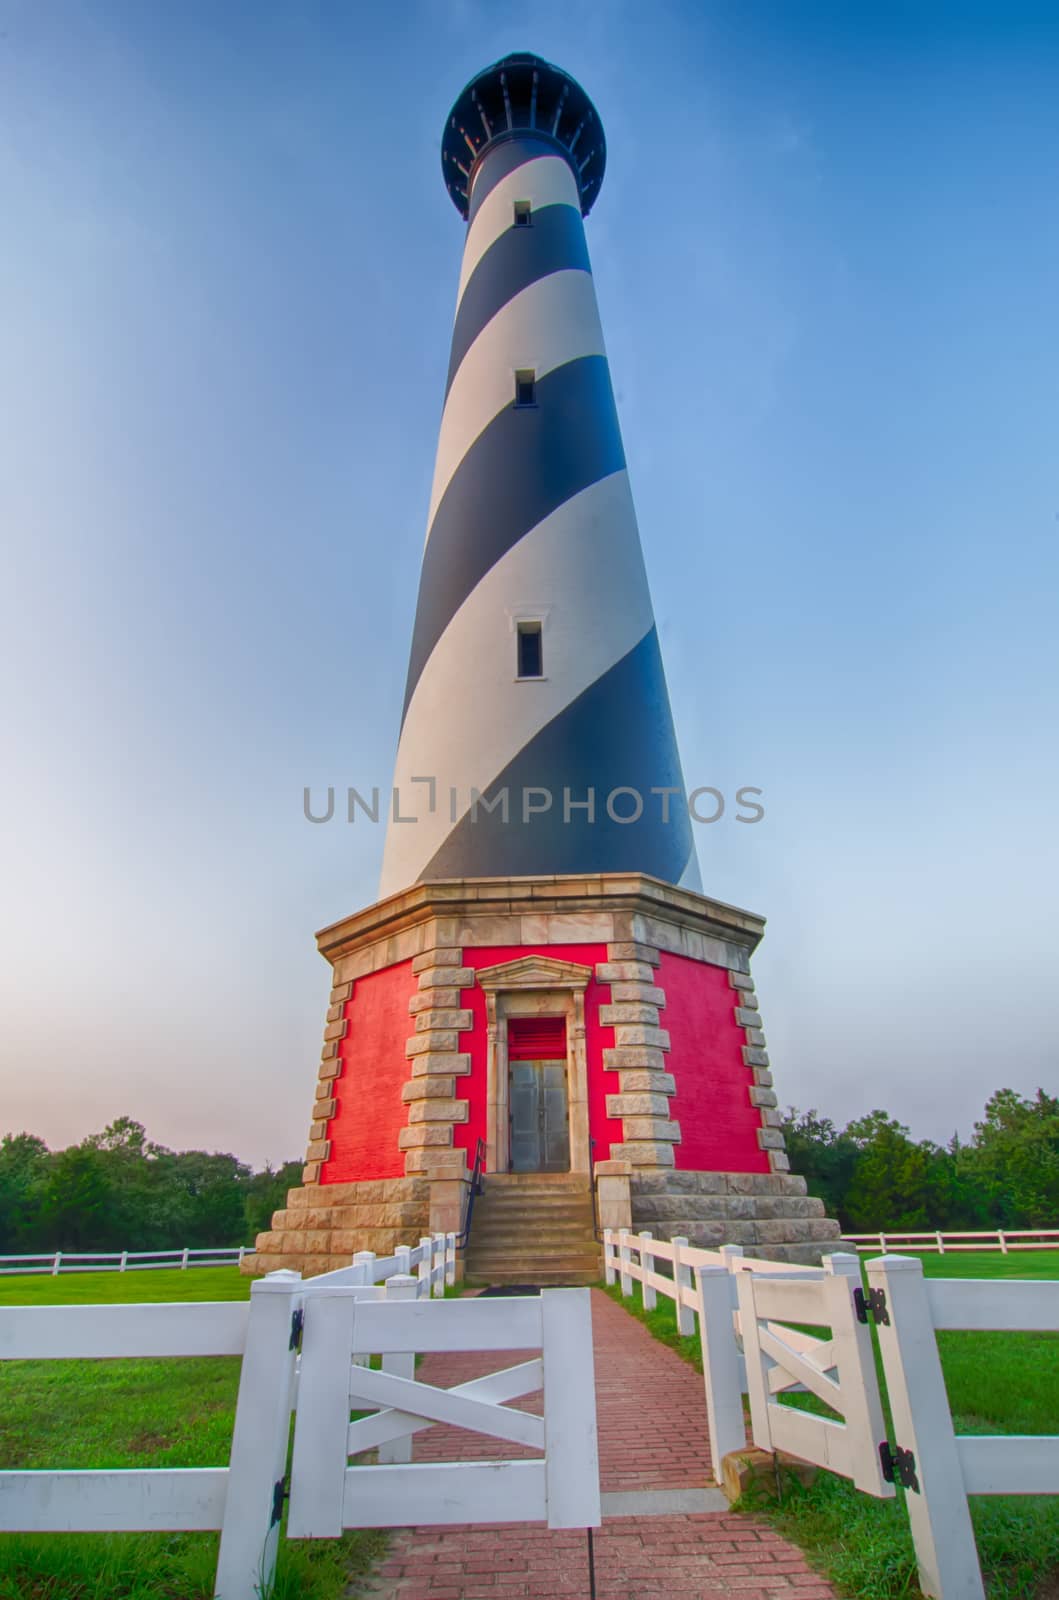 Cape Hatteras Lighthouse early morning on Outer banks, North Carolina